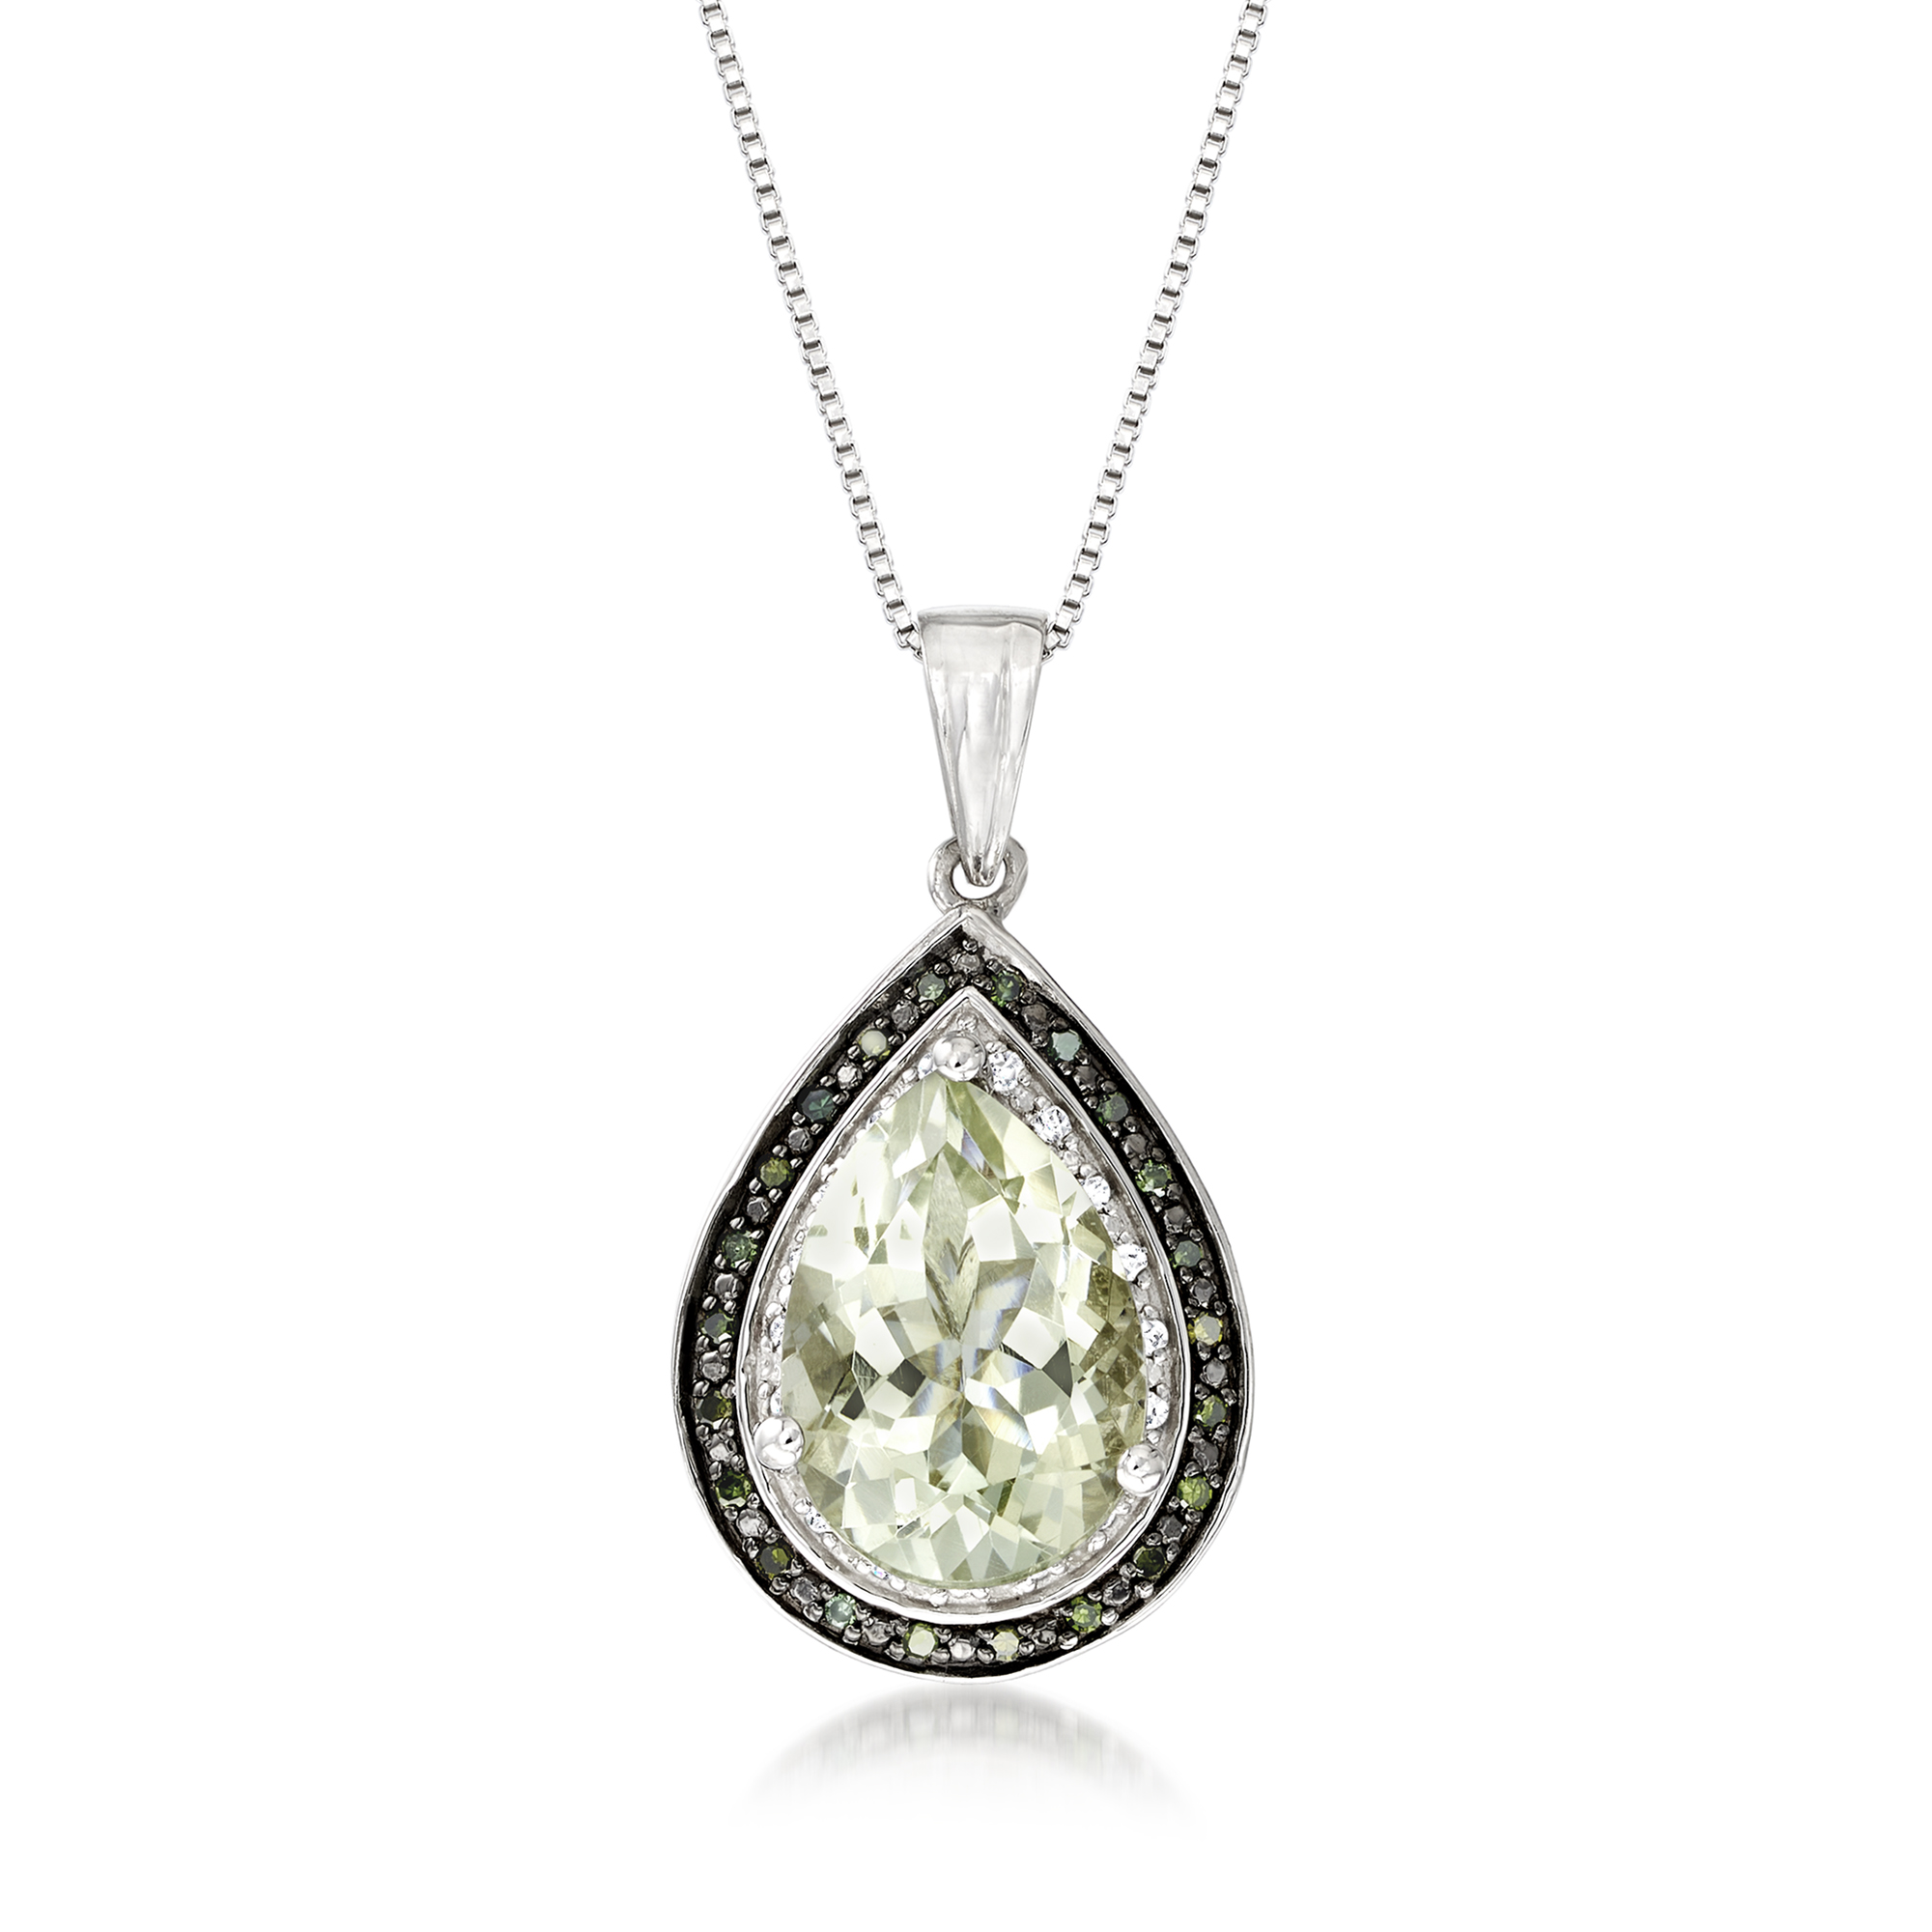 t.w Ross-Simons 5.00 Carat Green Prasiolite and .20 ct Peridot Pendant Necklace in Sterling Silver 